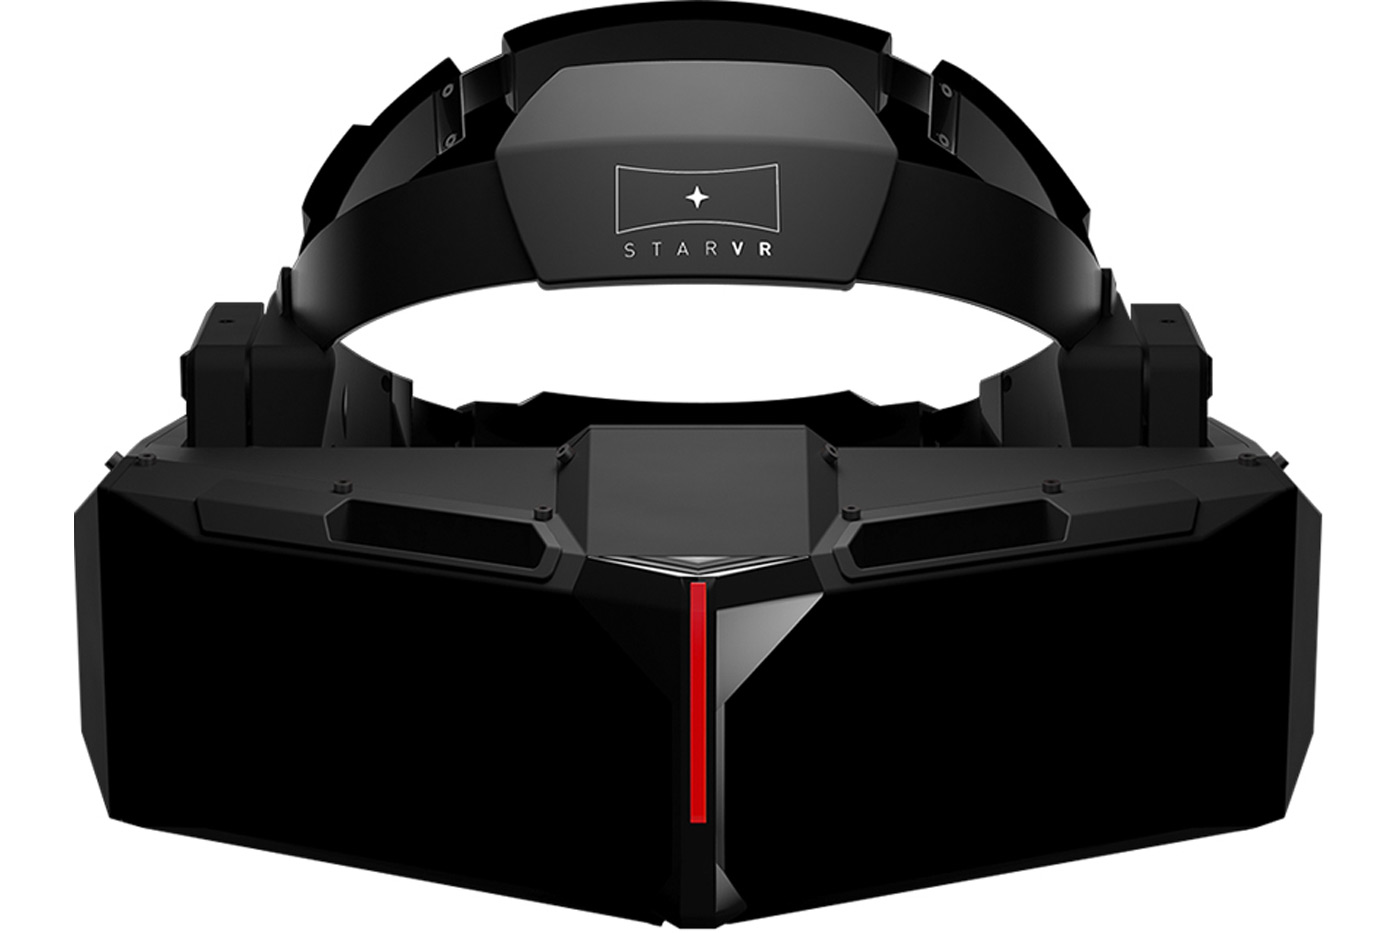 Acer will help Starbreeze make its VR headset